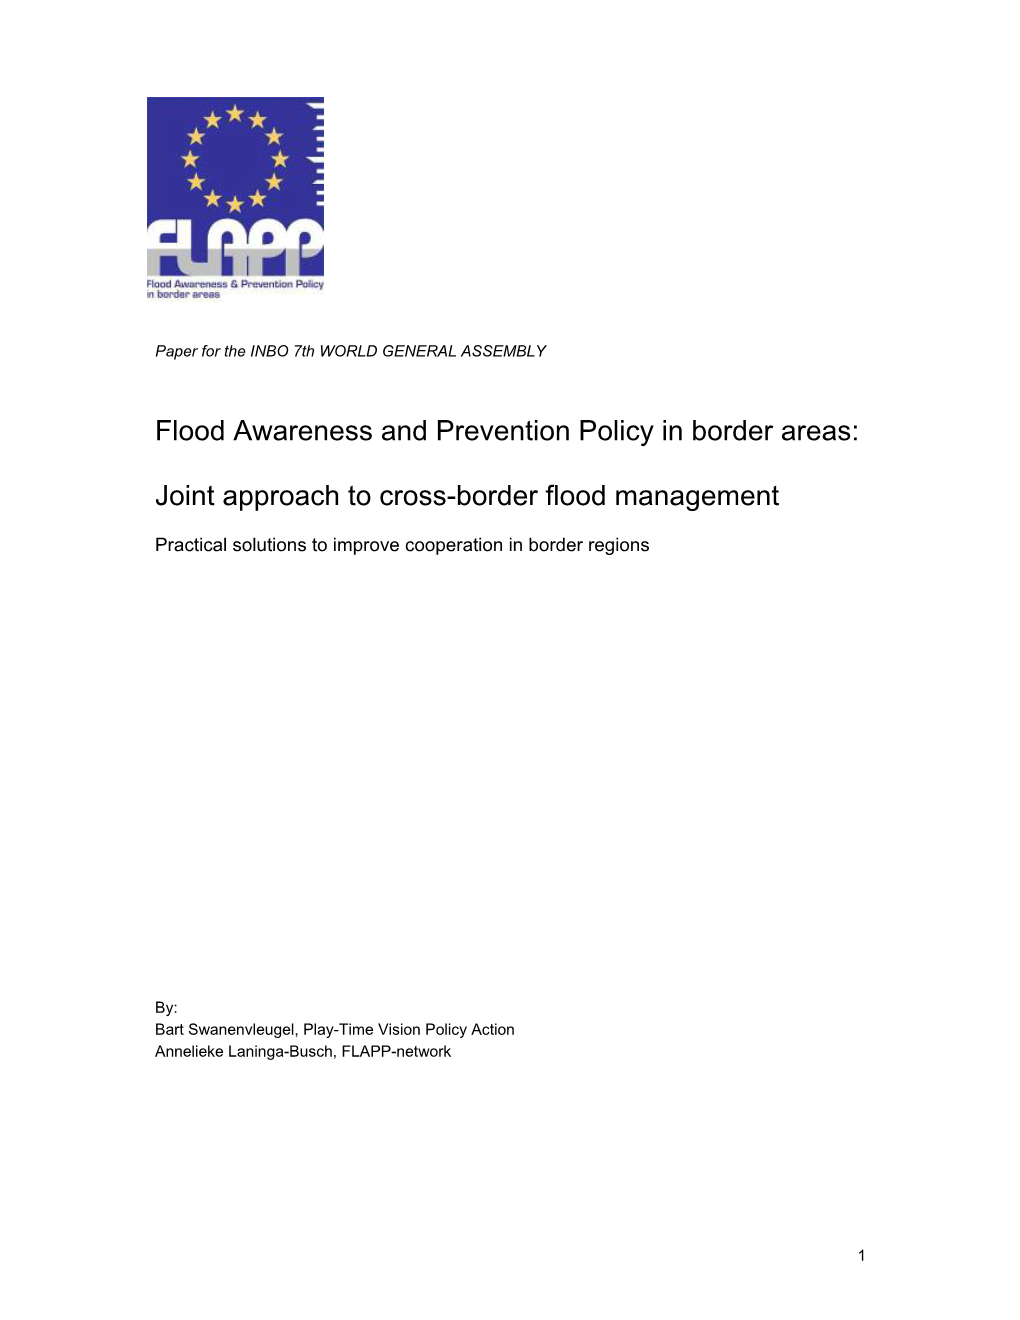 Joint Approach to Cross-Border Flood Management